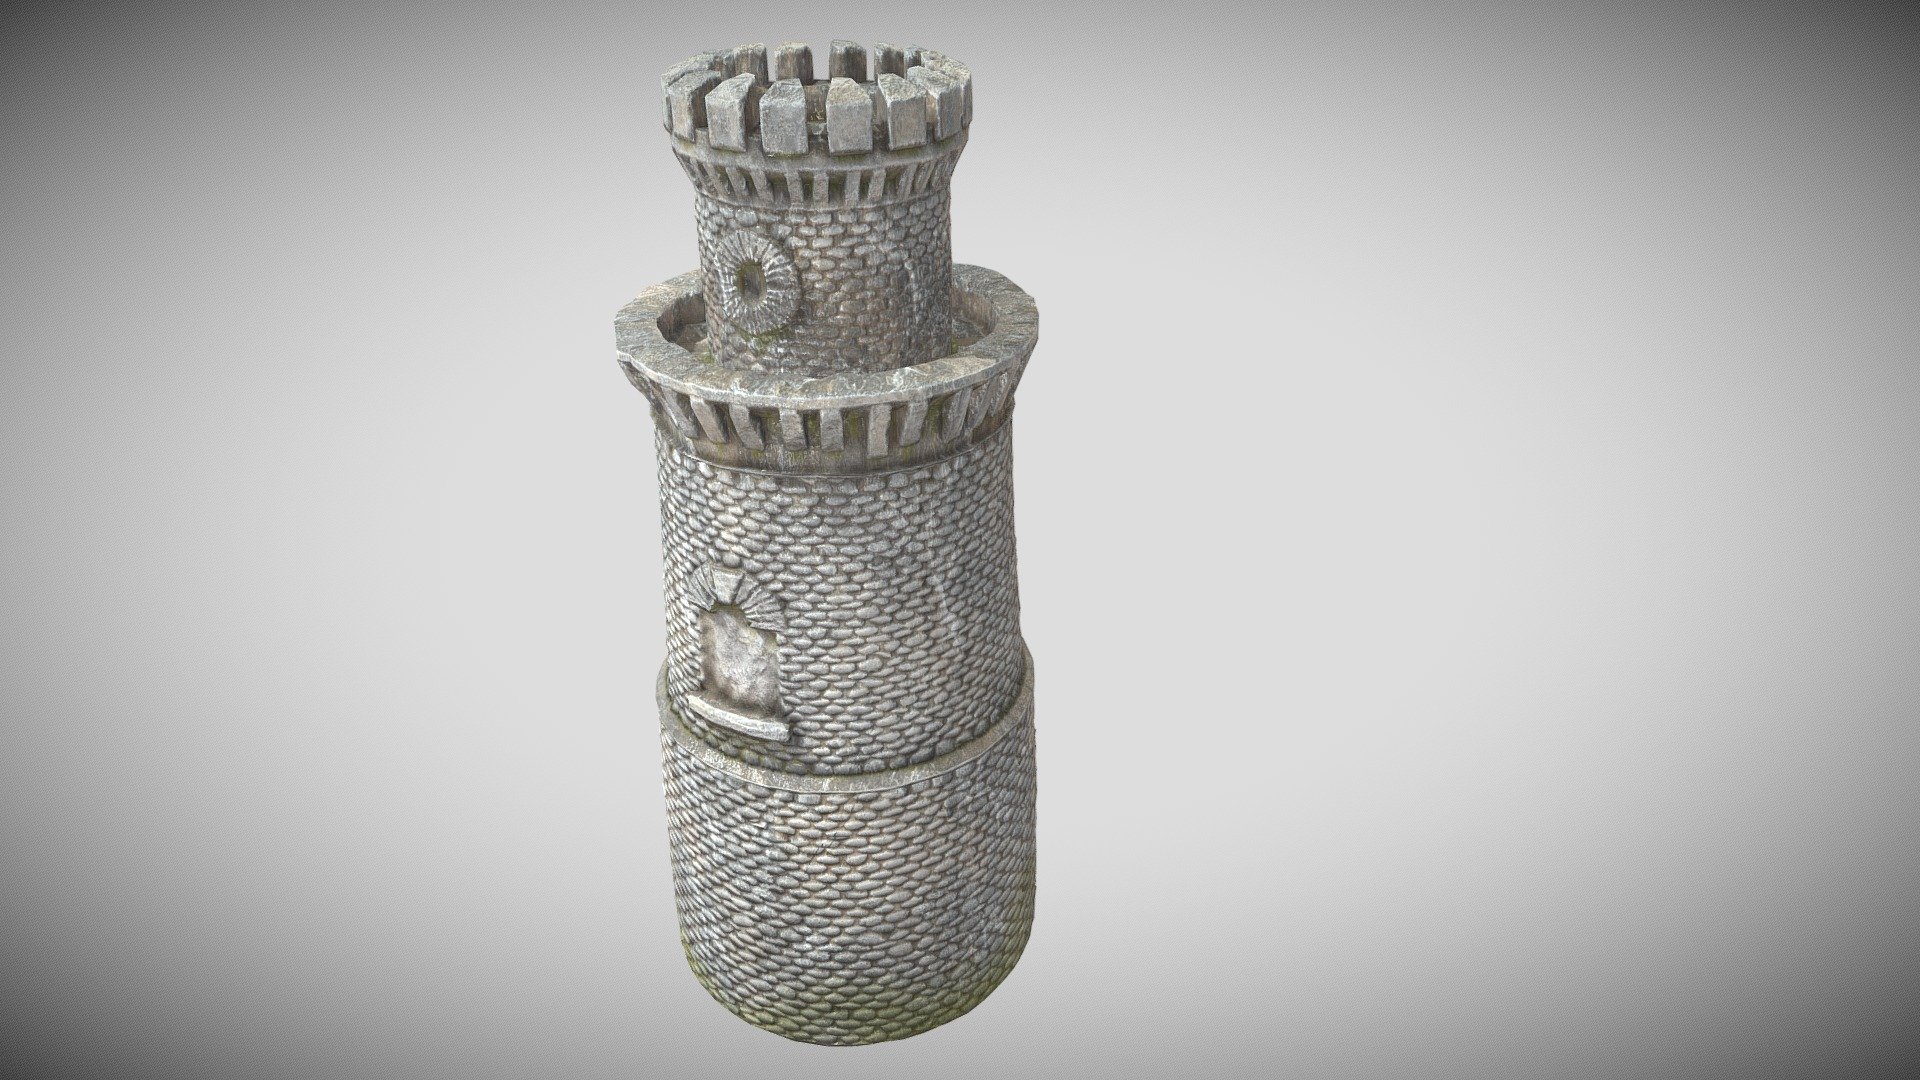 Low-poly 3D model of a Castle Tower / Turret - Embattlement Fortress. If you want to add a medieval flair to your project, this game-ready model is ideal. Diffuse, normal, bump, and smoothness maps are saved with the 2K PBR photographic textures that are included with the Castle Tower model.

With only 16987 faces and 8552 vertices, this low-poly Castle Tower model has undergone extensive optimisation, making it appropriate for usage in real-time applications. It is simple to use with a number of software applications since the medieval Castle Tower Low-poly 3D model has been exported in six distinct file formats, including blend (native), obj, fbx, stl, ply, and dae.

Whether you’re making a video game, virtual reality experience, or architectural visualisation, this model will impress. Make sure to download the Castle Tower - medieval Embattlement Fortress Low-poly 3D model right away if you’re searching for a high-quality, low-poly medieval game asset 3d model